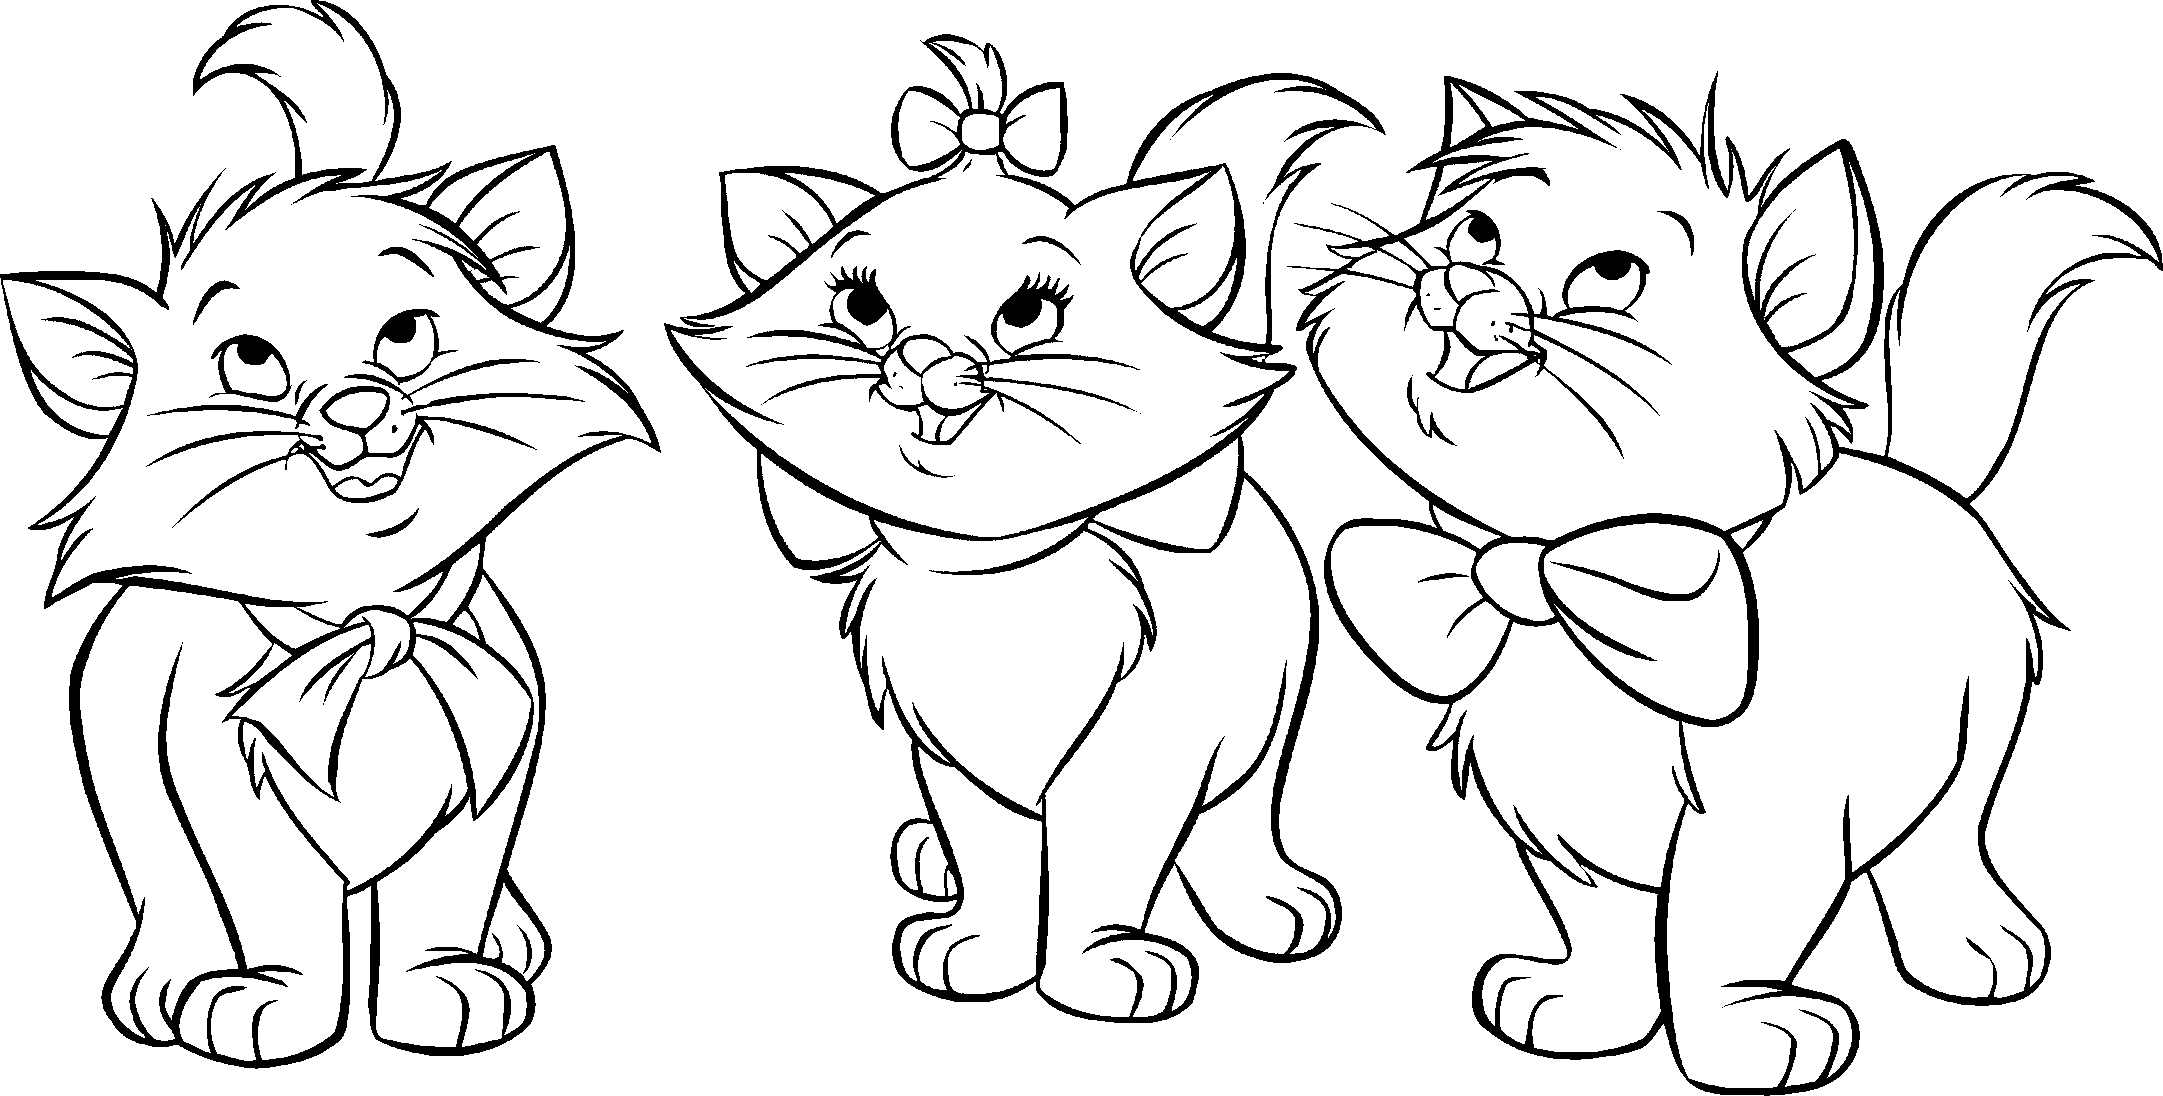 Cat And Kitten Coloring Pages For Kids Printable - VoteForVerde.com